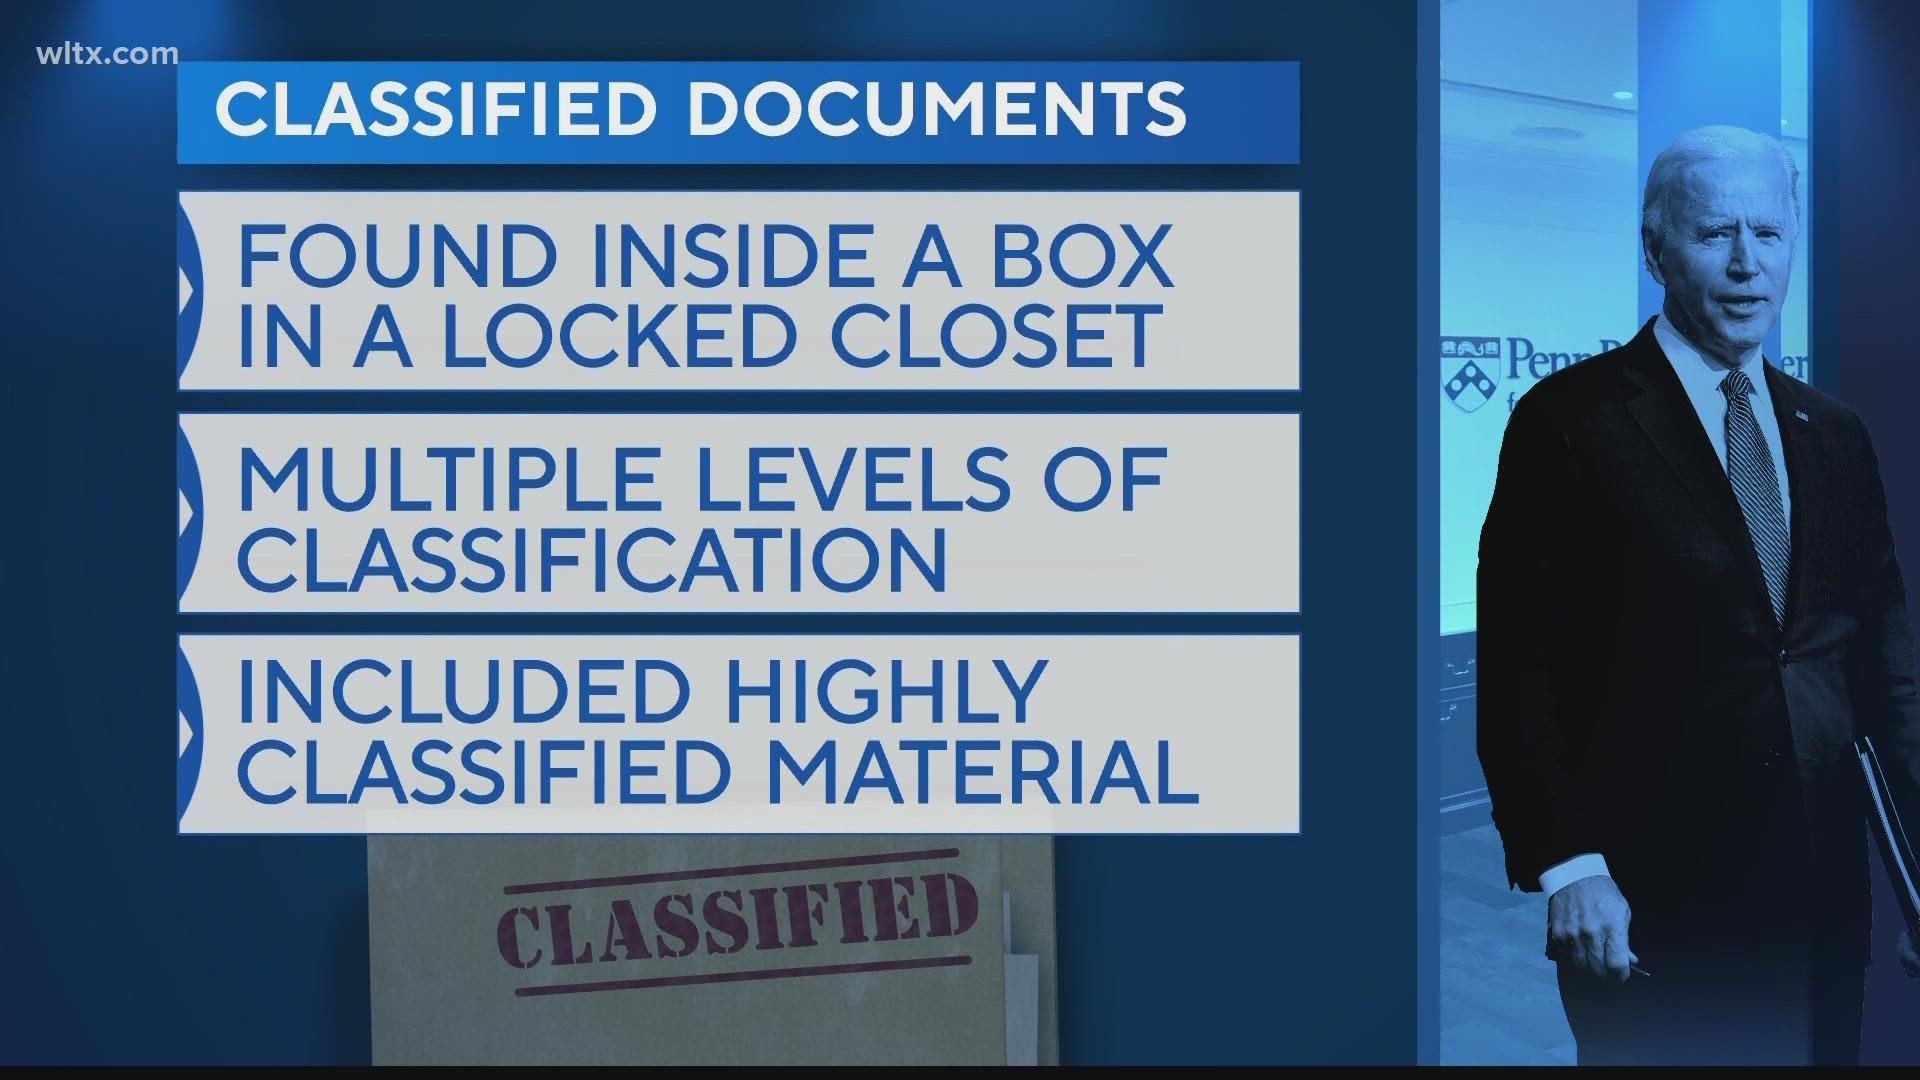 President Joe Biden said he was surprised when informed that classified government records were found by his attorneys at his former office space in Washington.